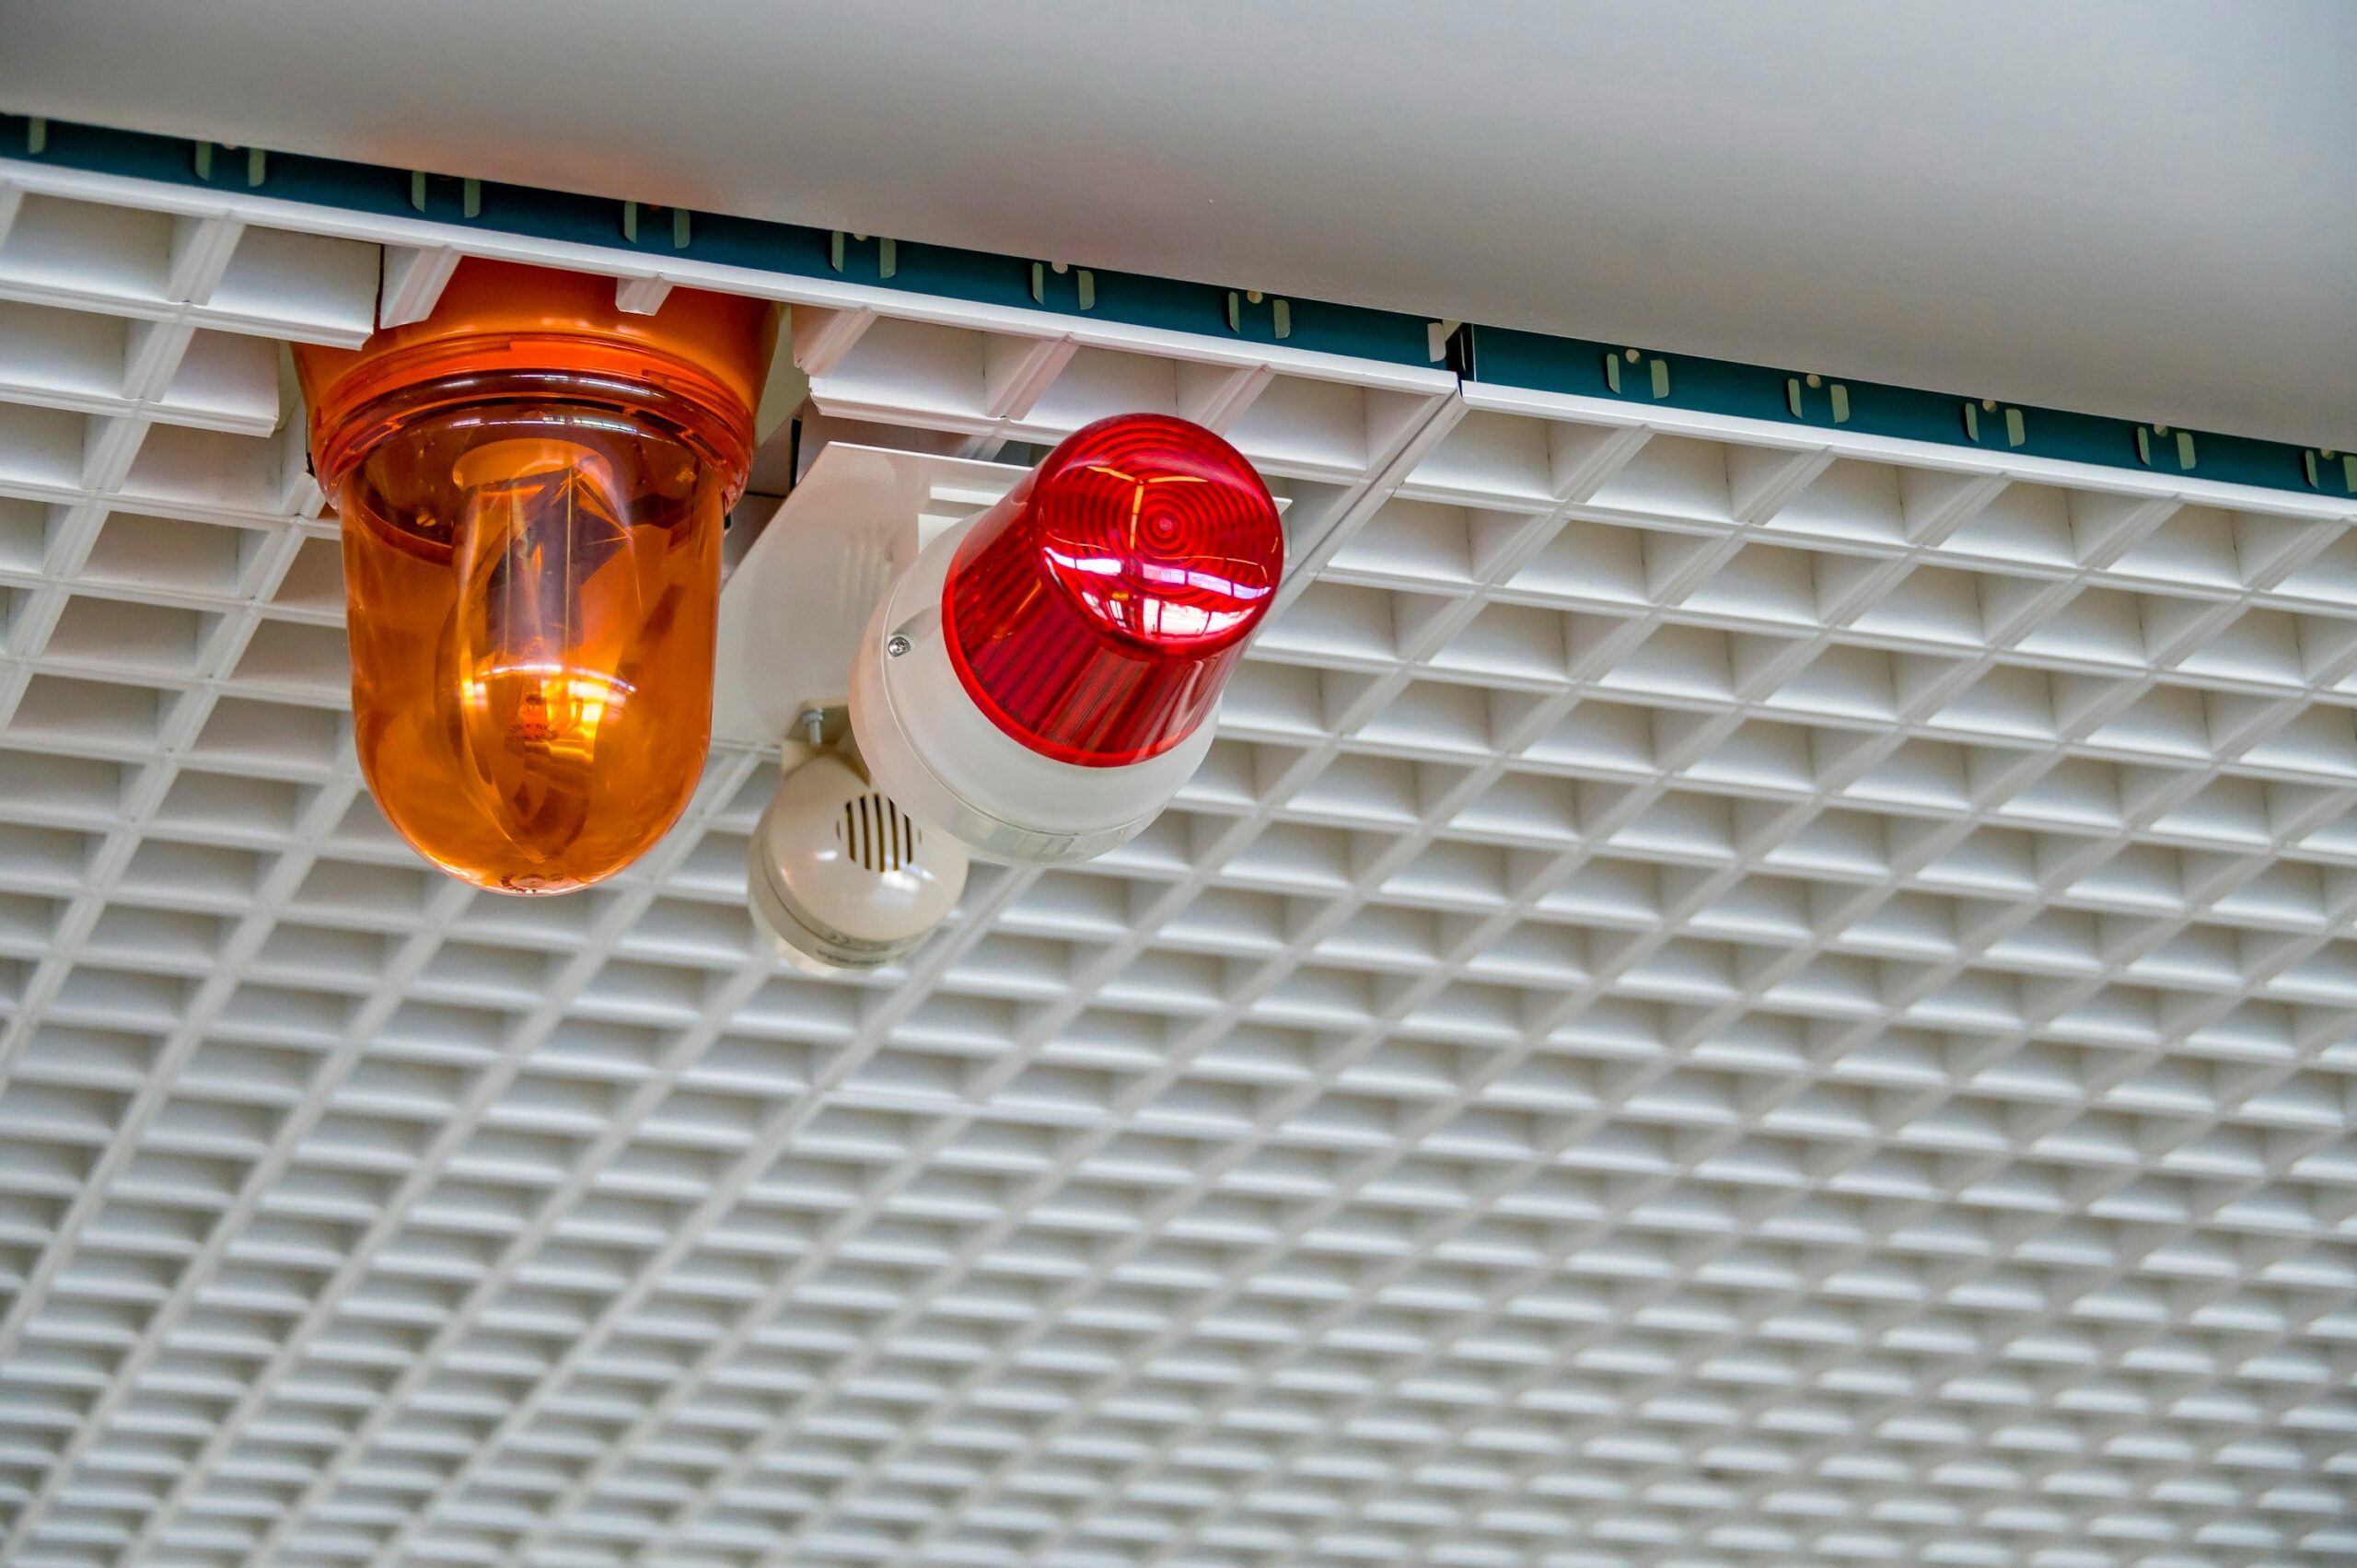 A sleek fire alarm system mounted to a ceiling - Kistler O'Brien Fire Protection